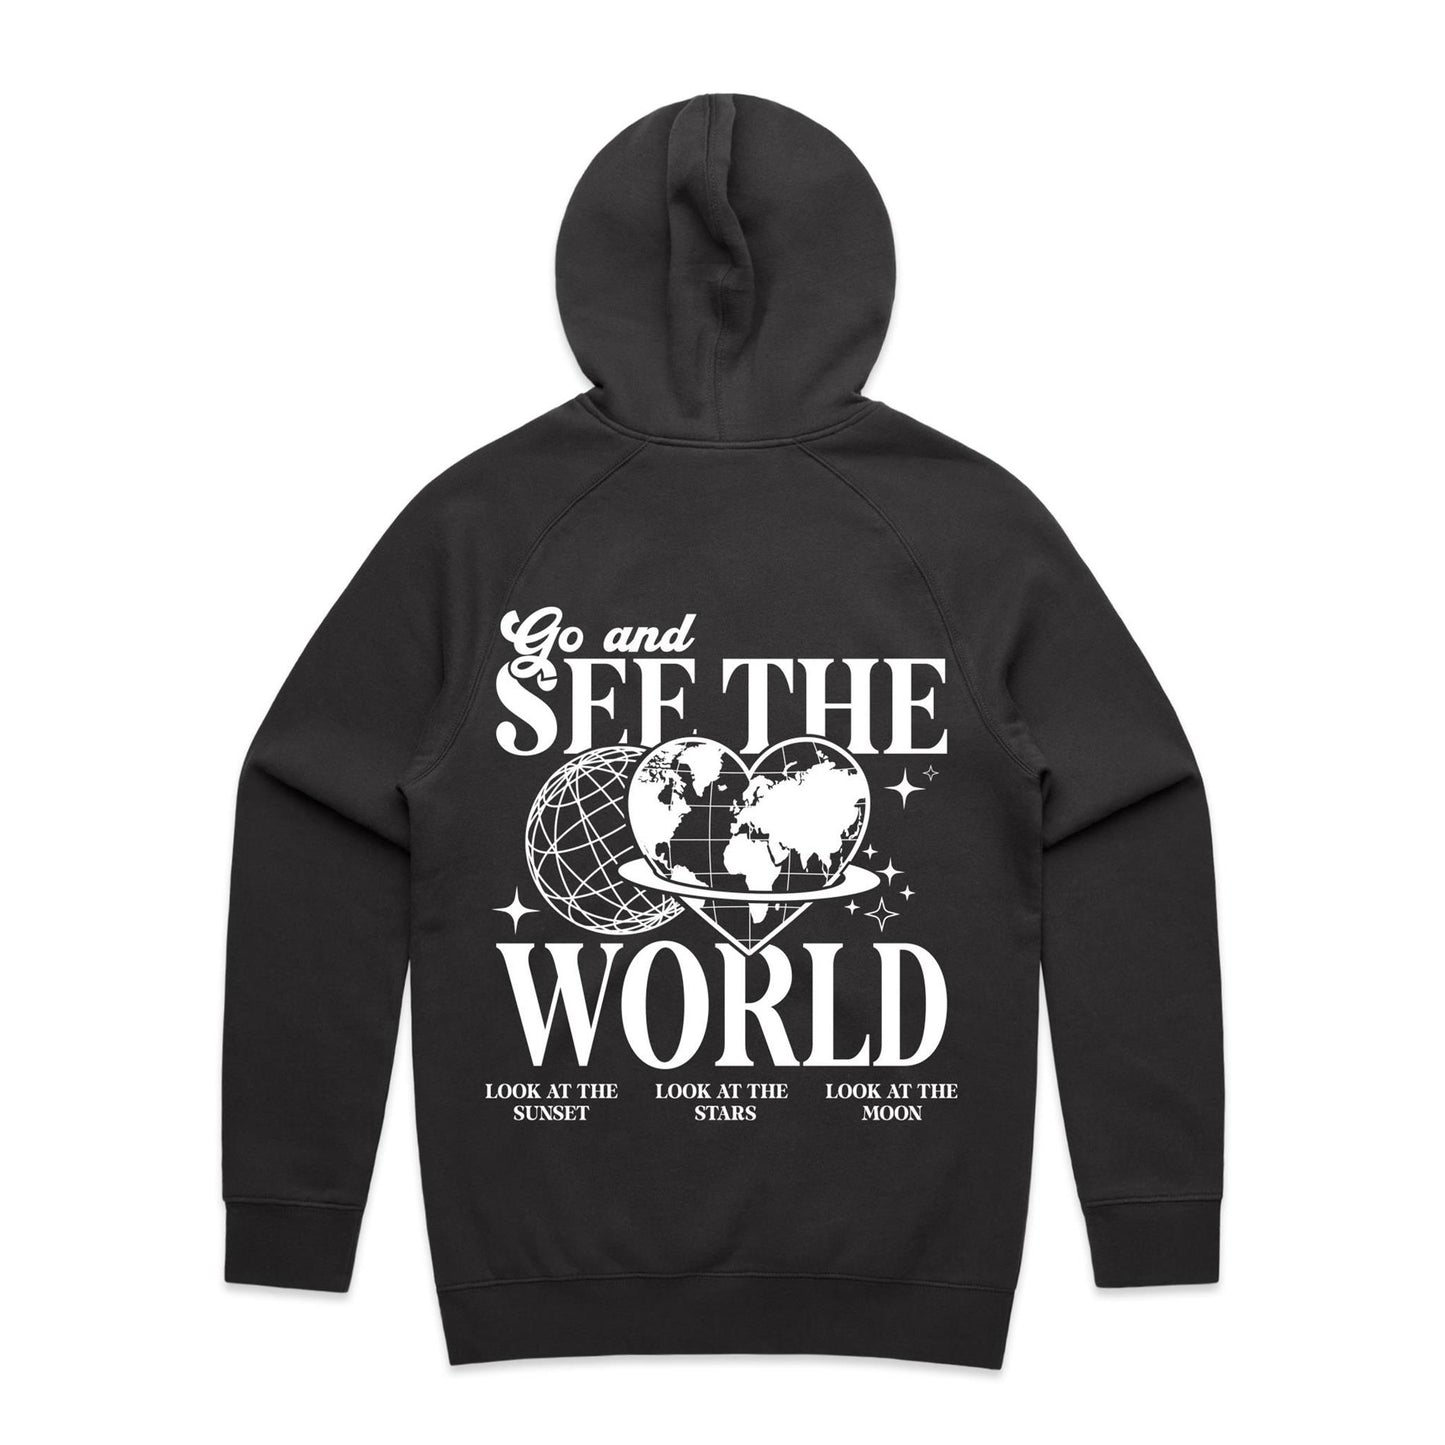 Unisex Hoodie - Go See The World